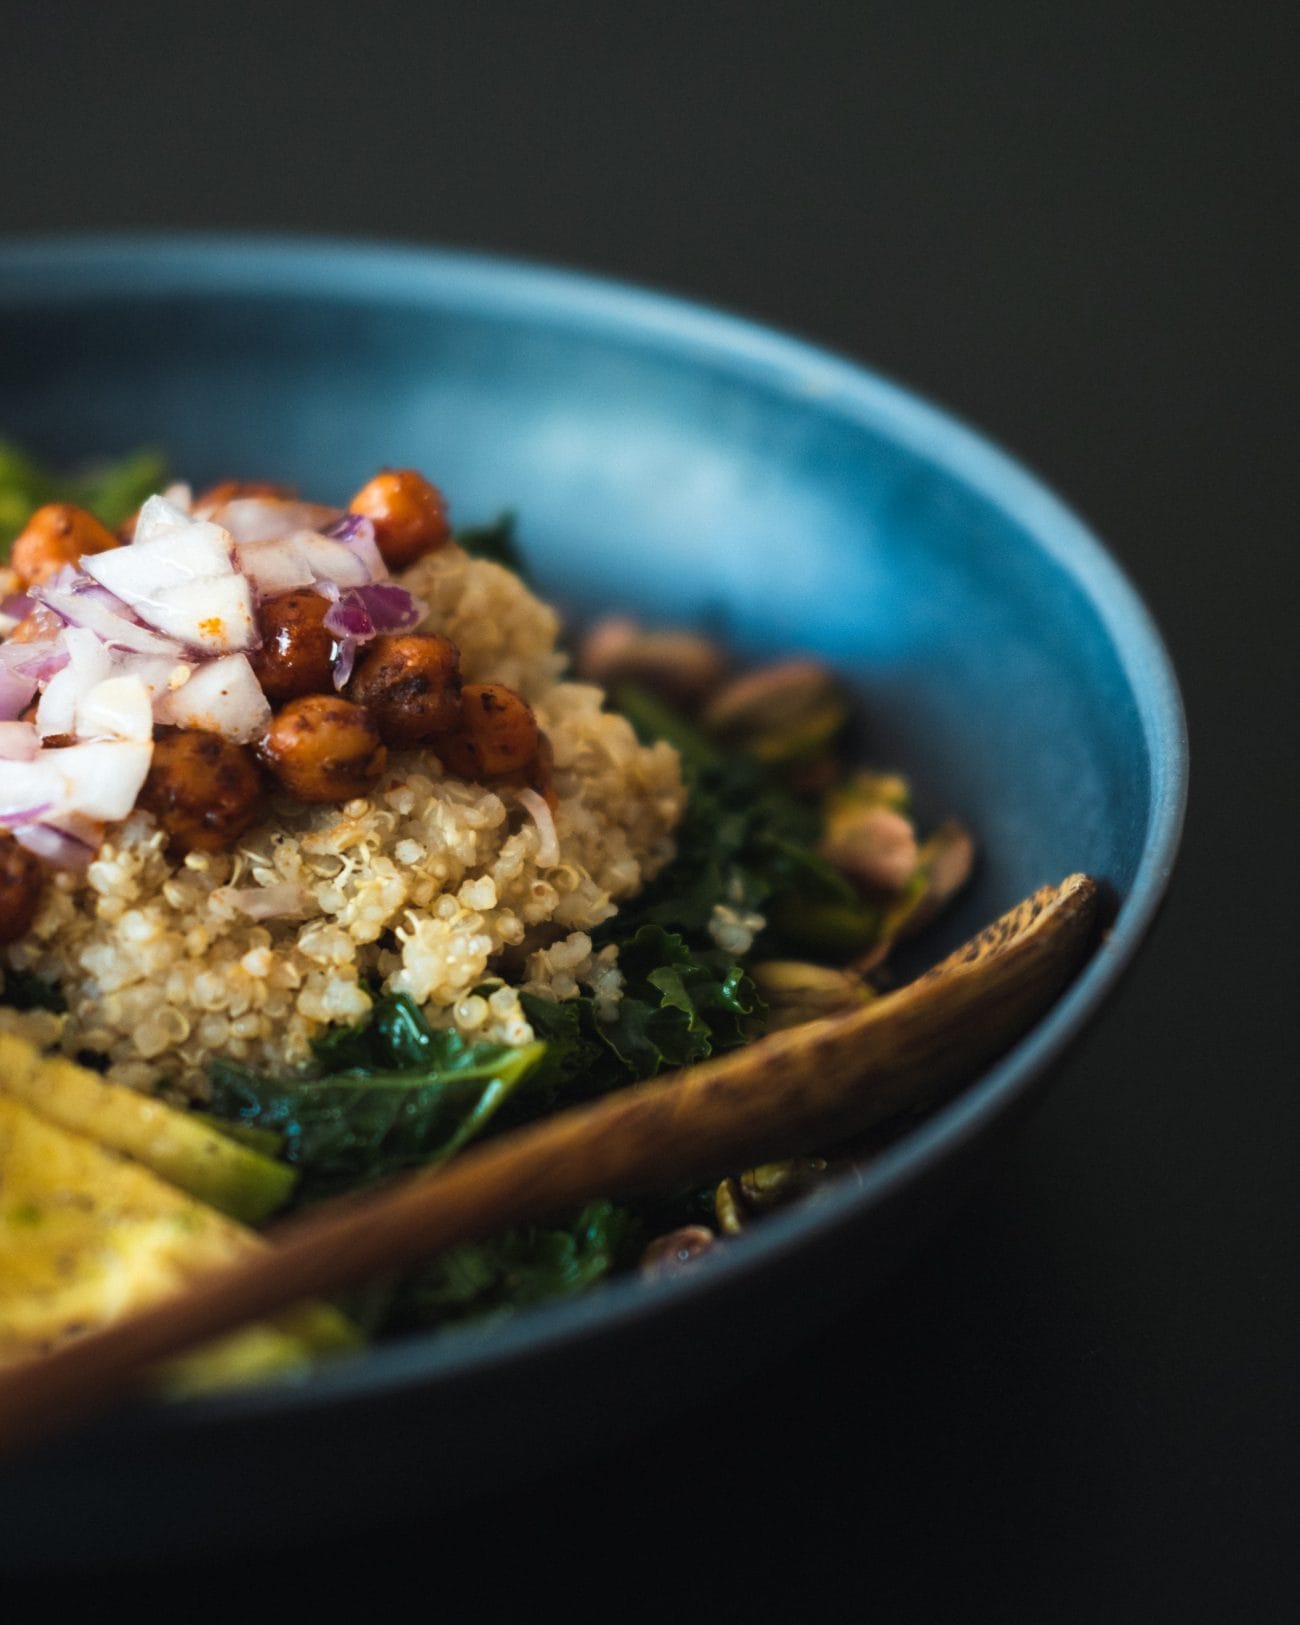 Is Quinoa Keto-Friendly And Low Carb? - KetoConnect